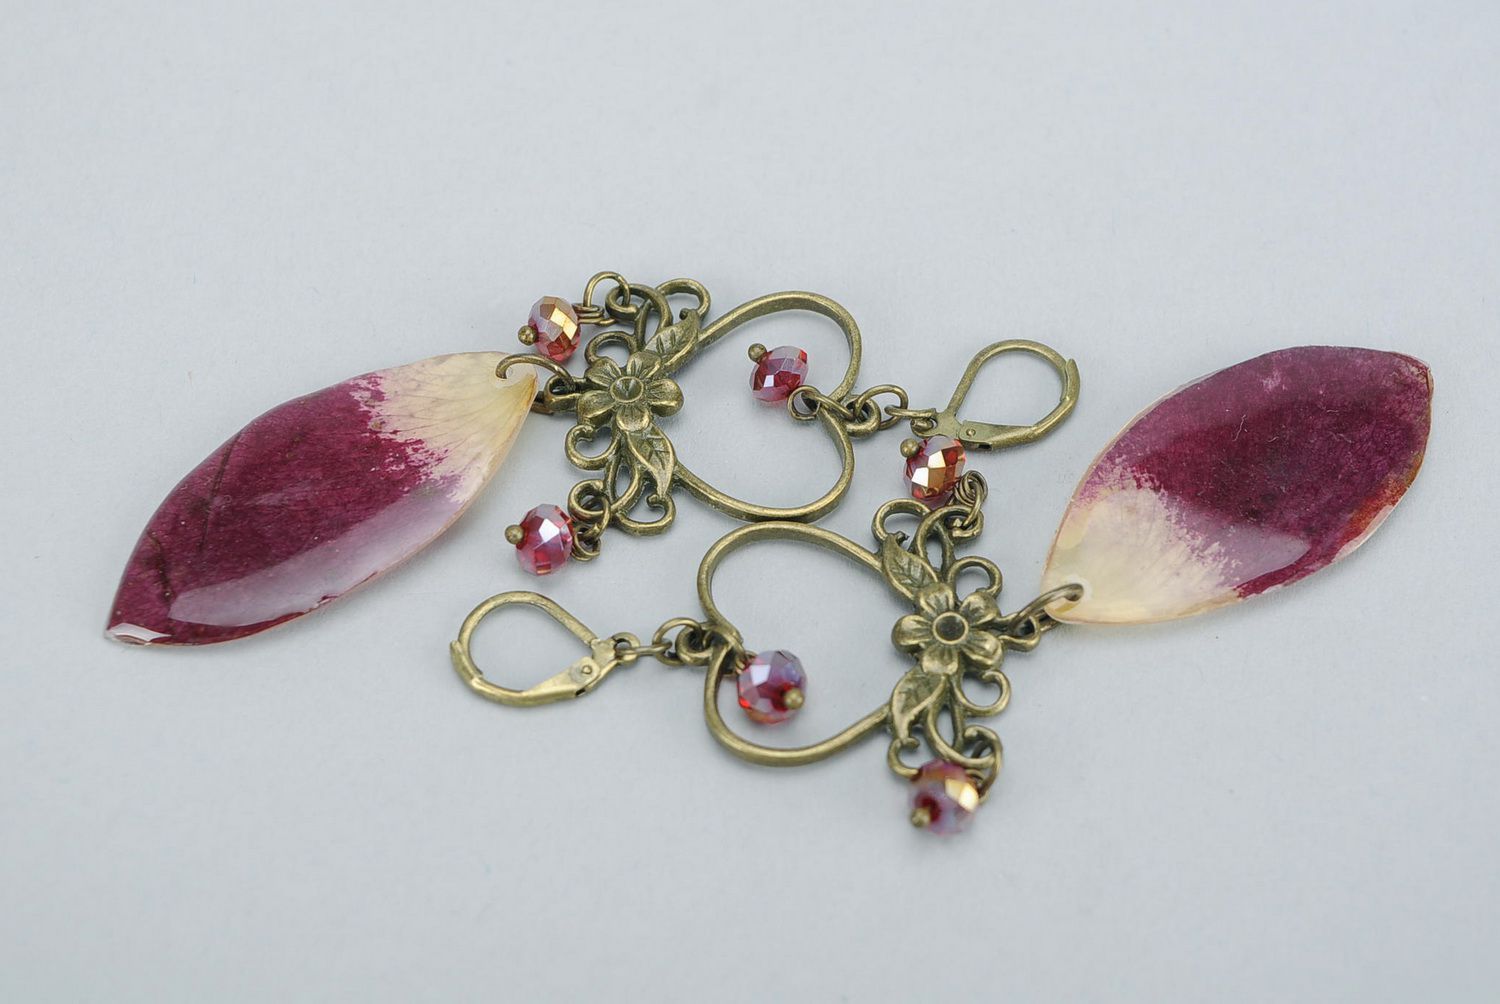 Earrings made from rose petals and crystal beads photo 1